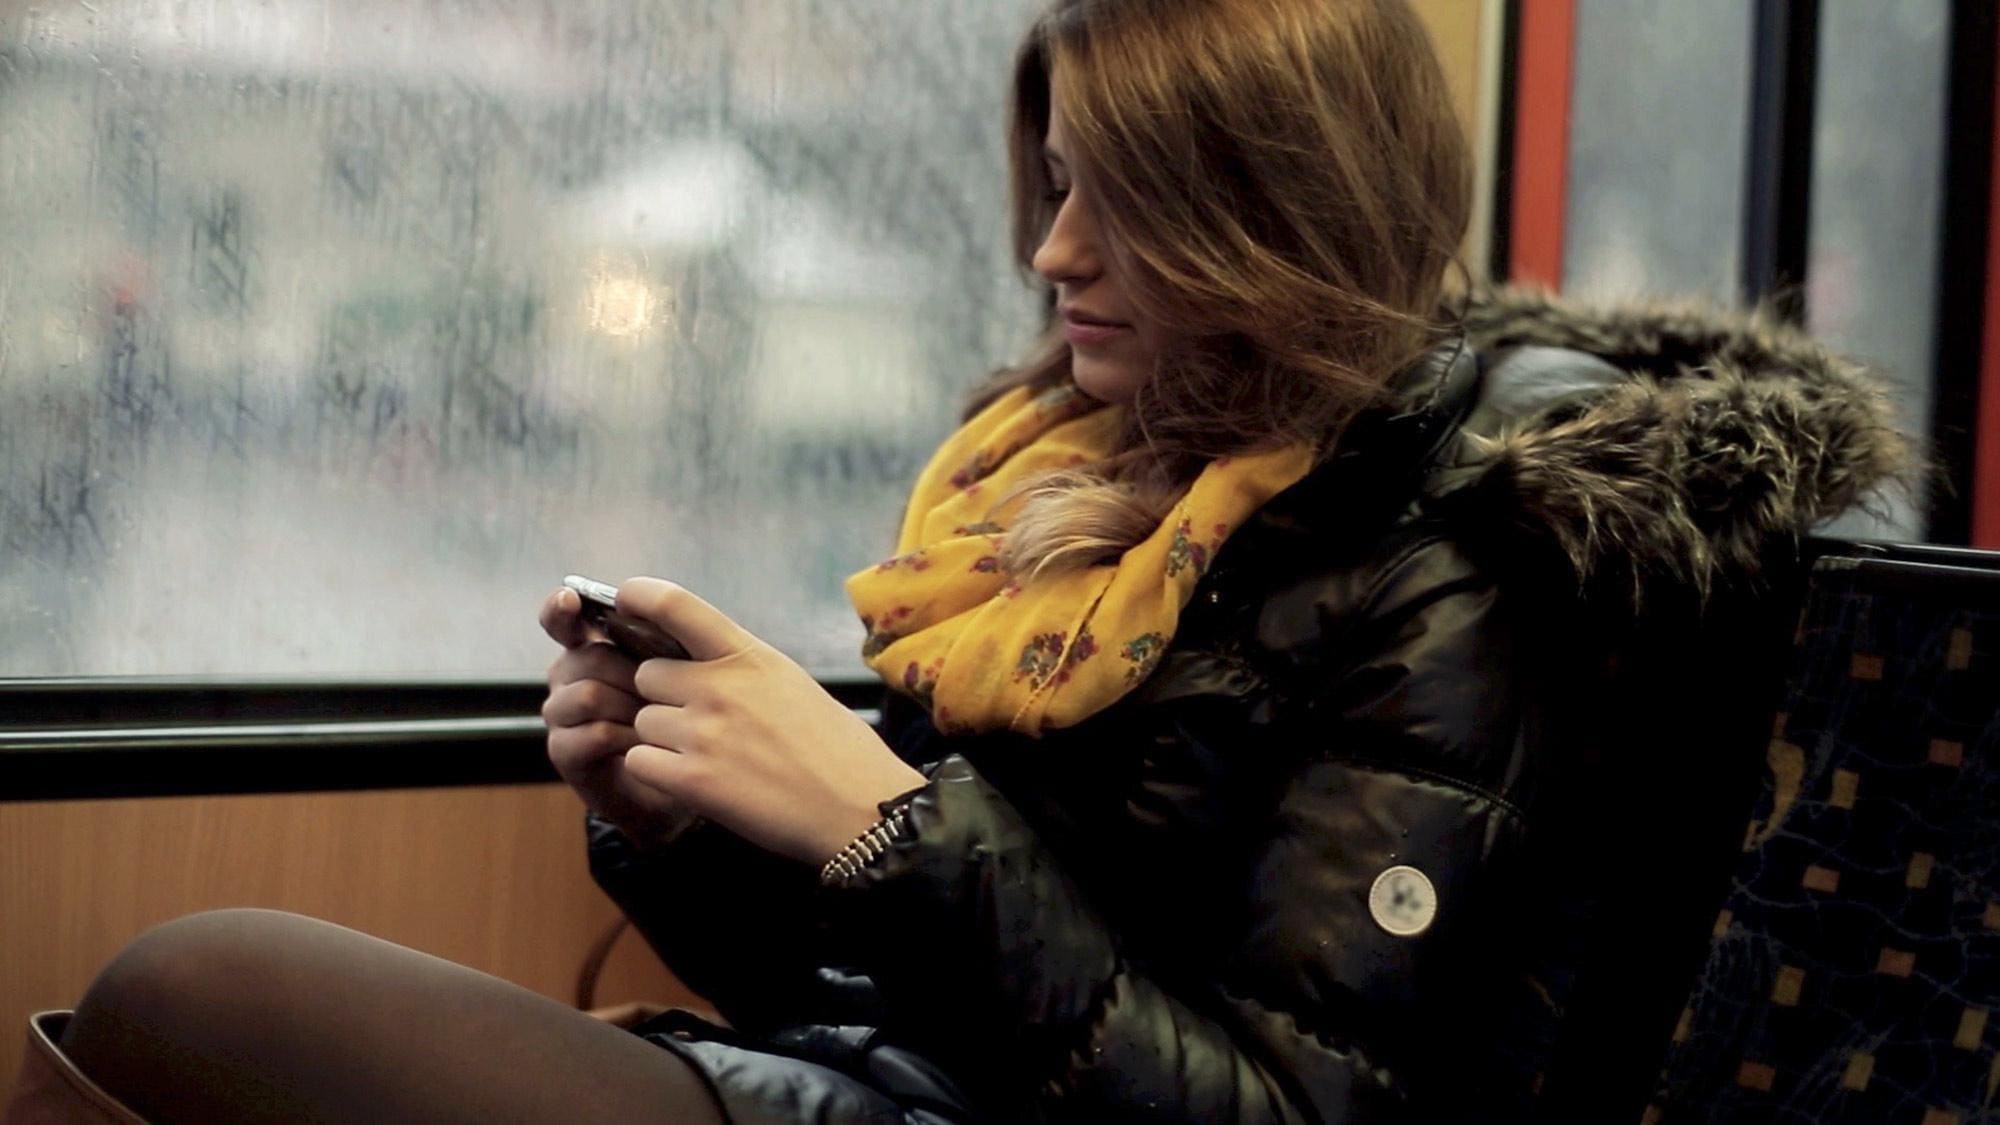 Woman sitting beside window looking at mobile device.